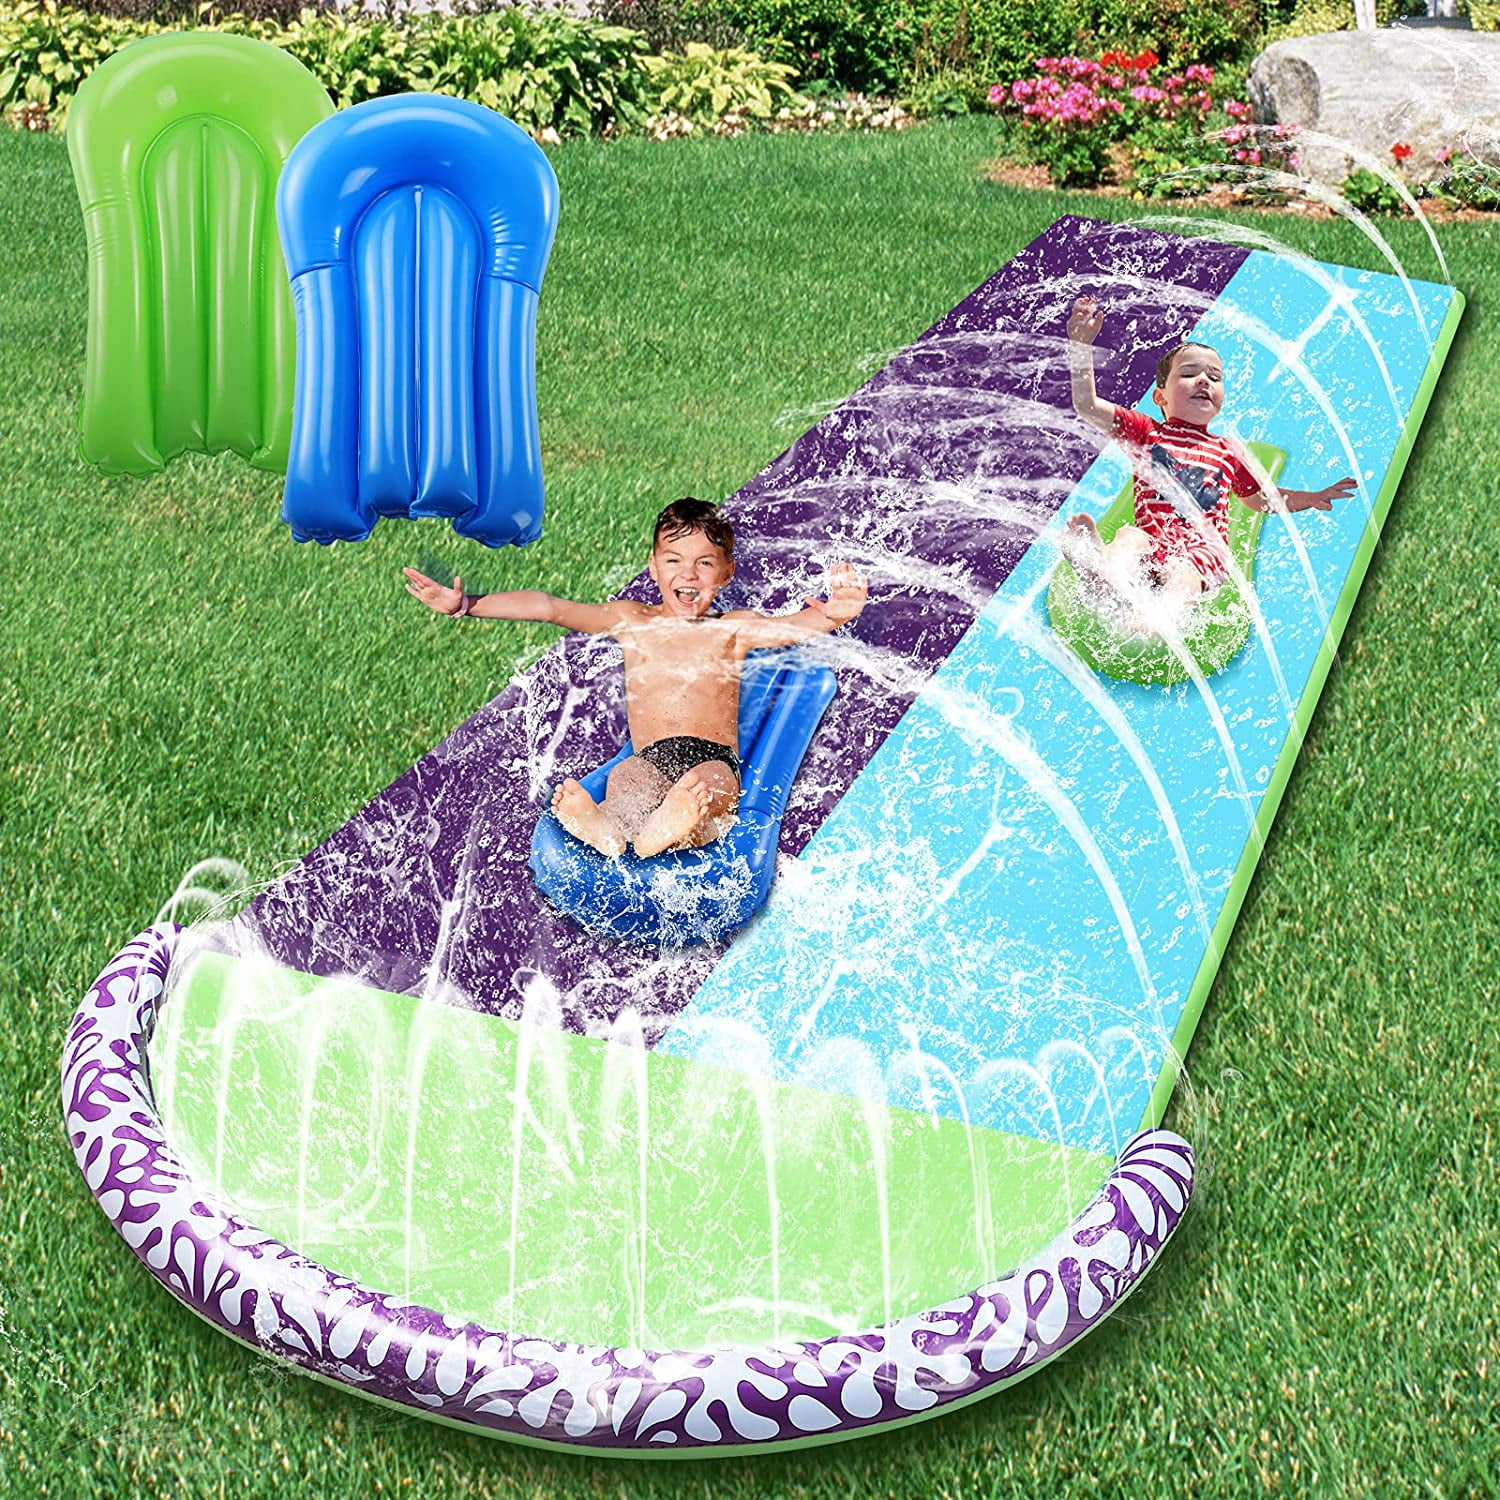 Garden Backyard Giant Racing Lanes and Splash Pool Outdoor 15.7FT Water Slides with Crash Pad Outdoor Water Toys Lawn Water Slides for Kids Adults